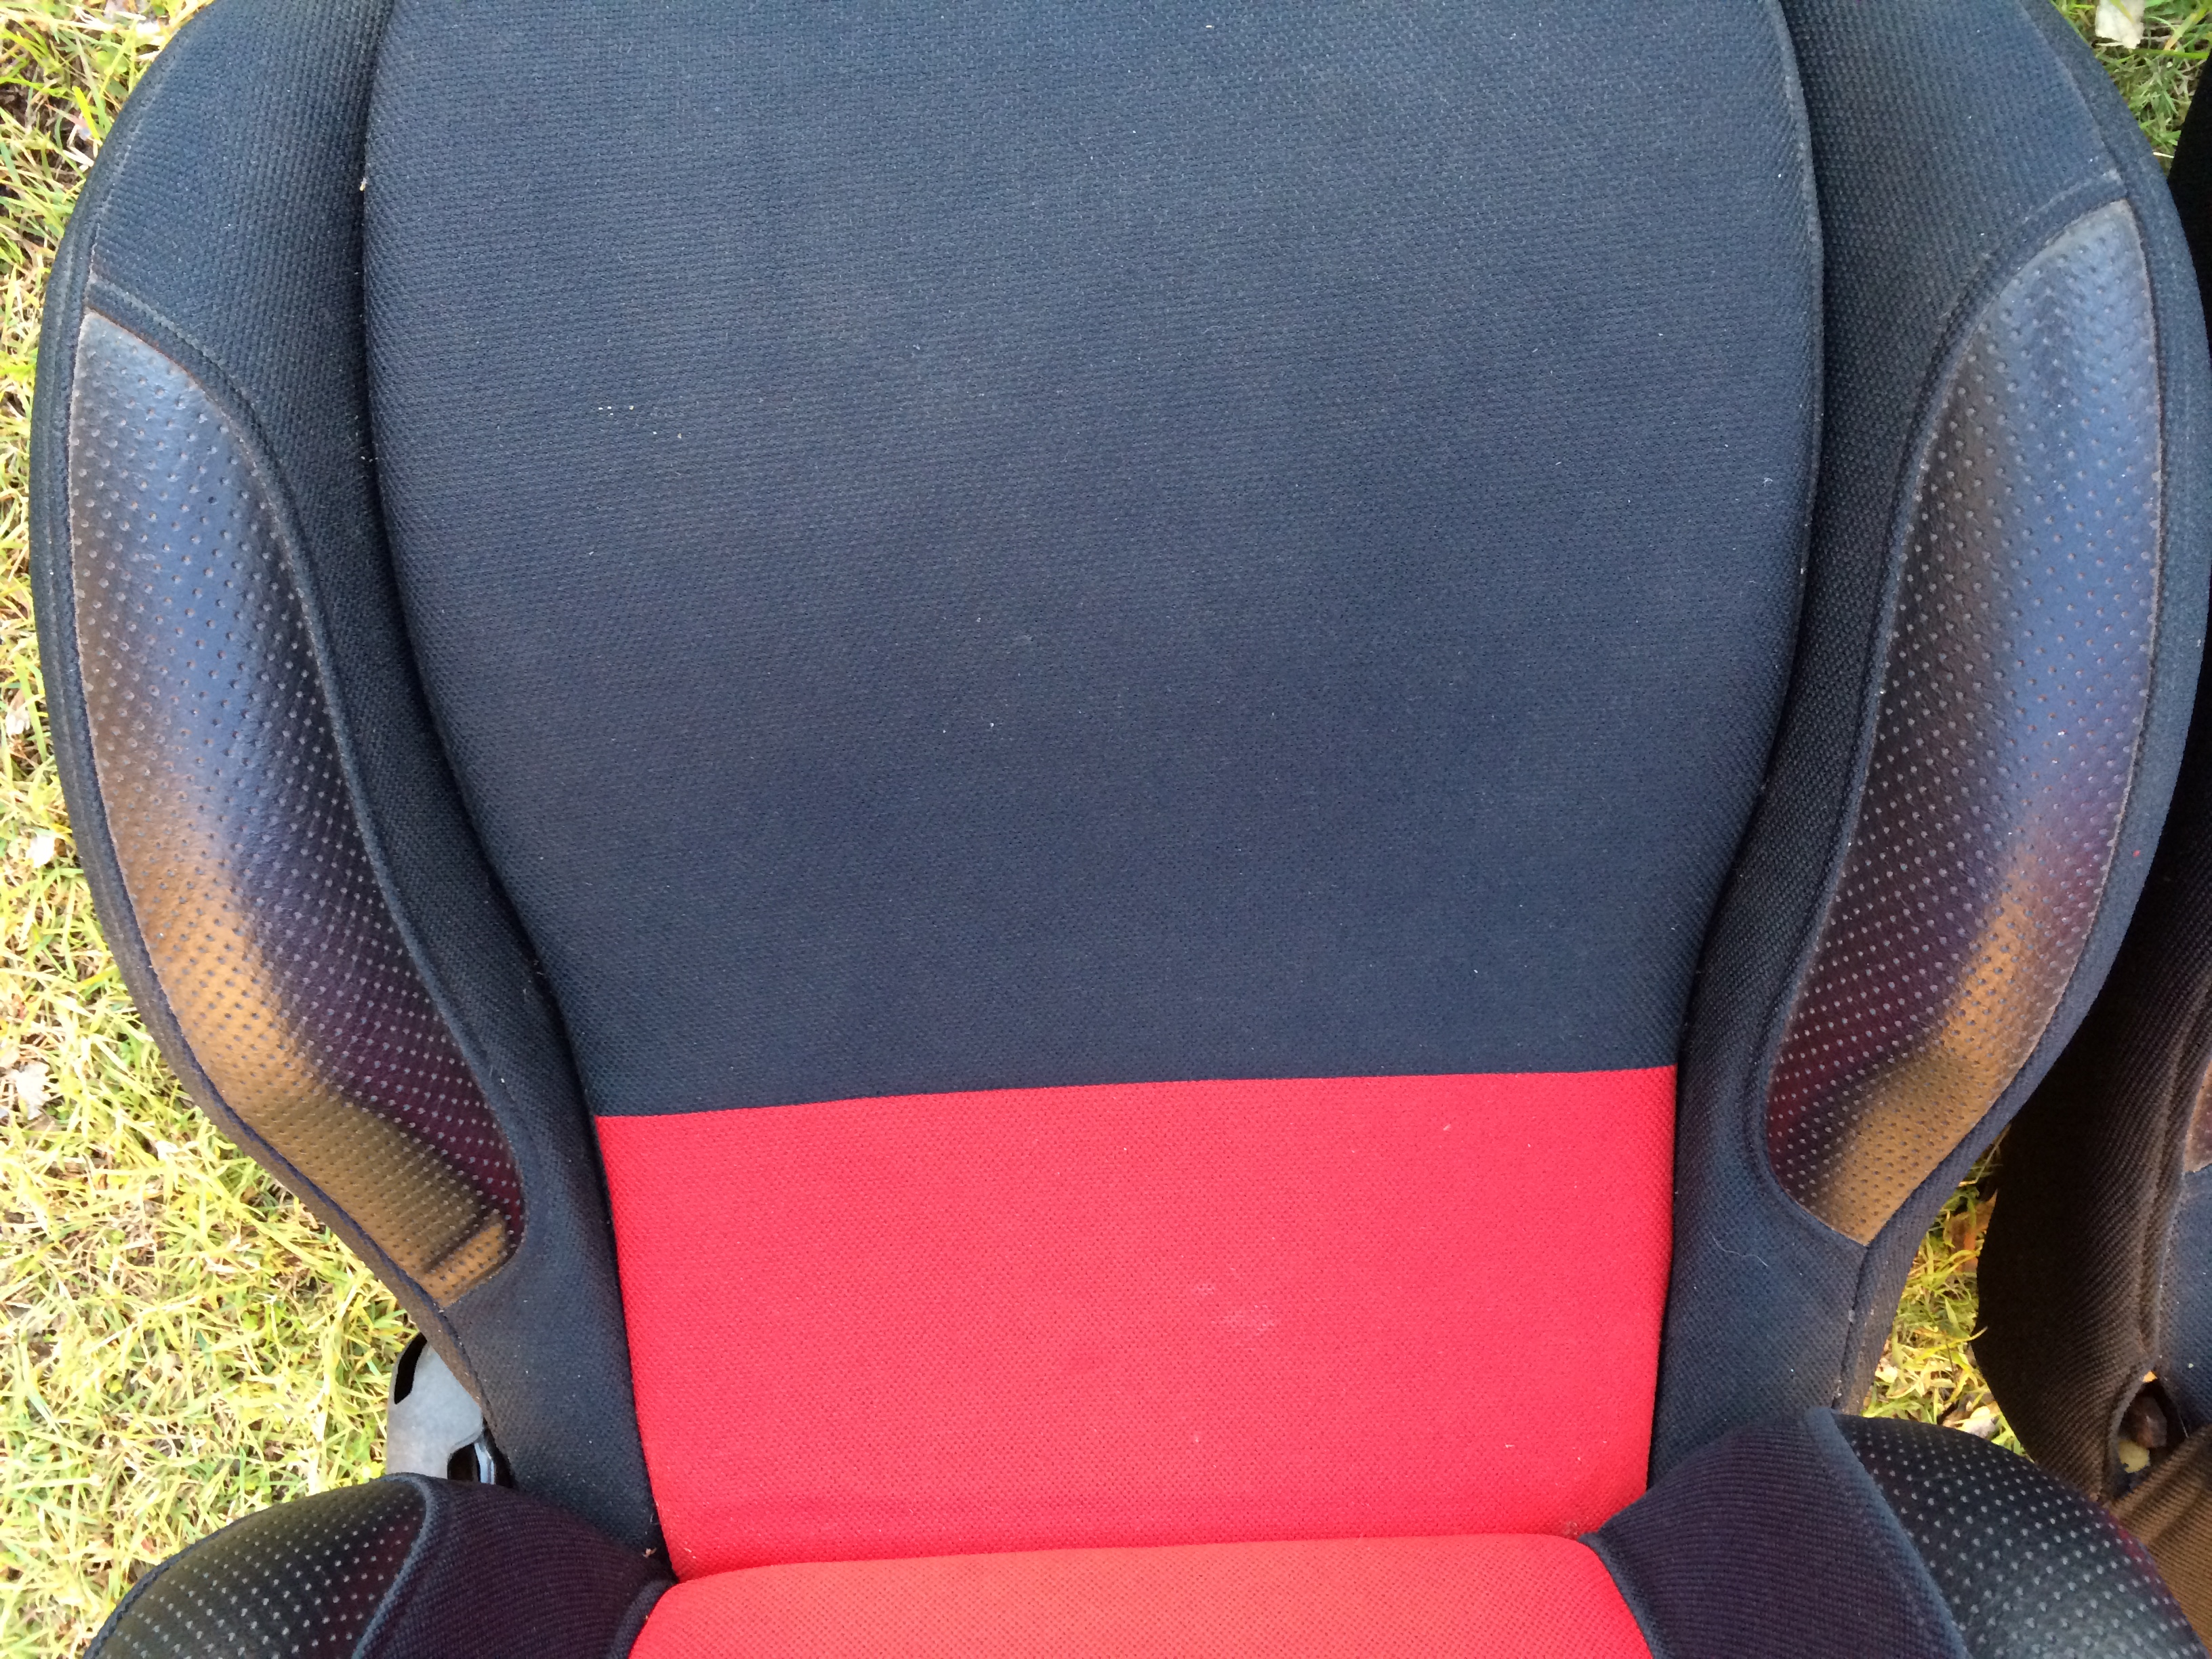 New Monza Rally Seats